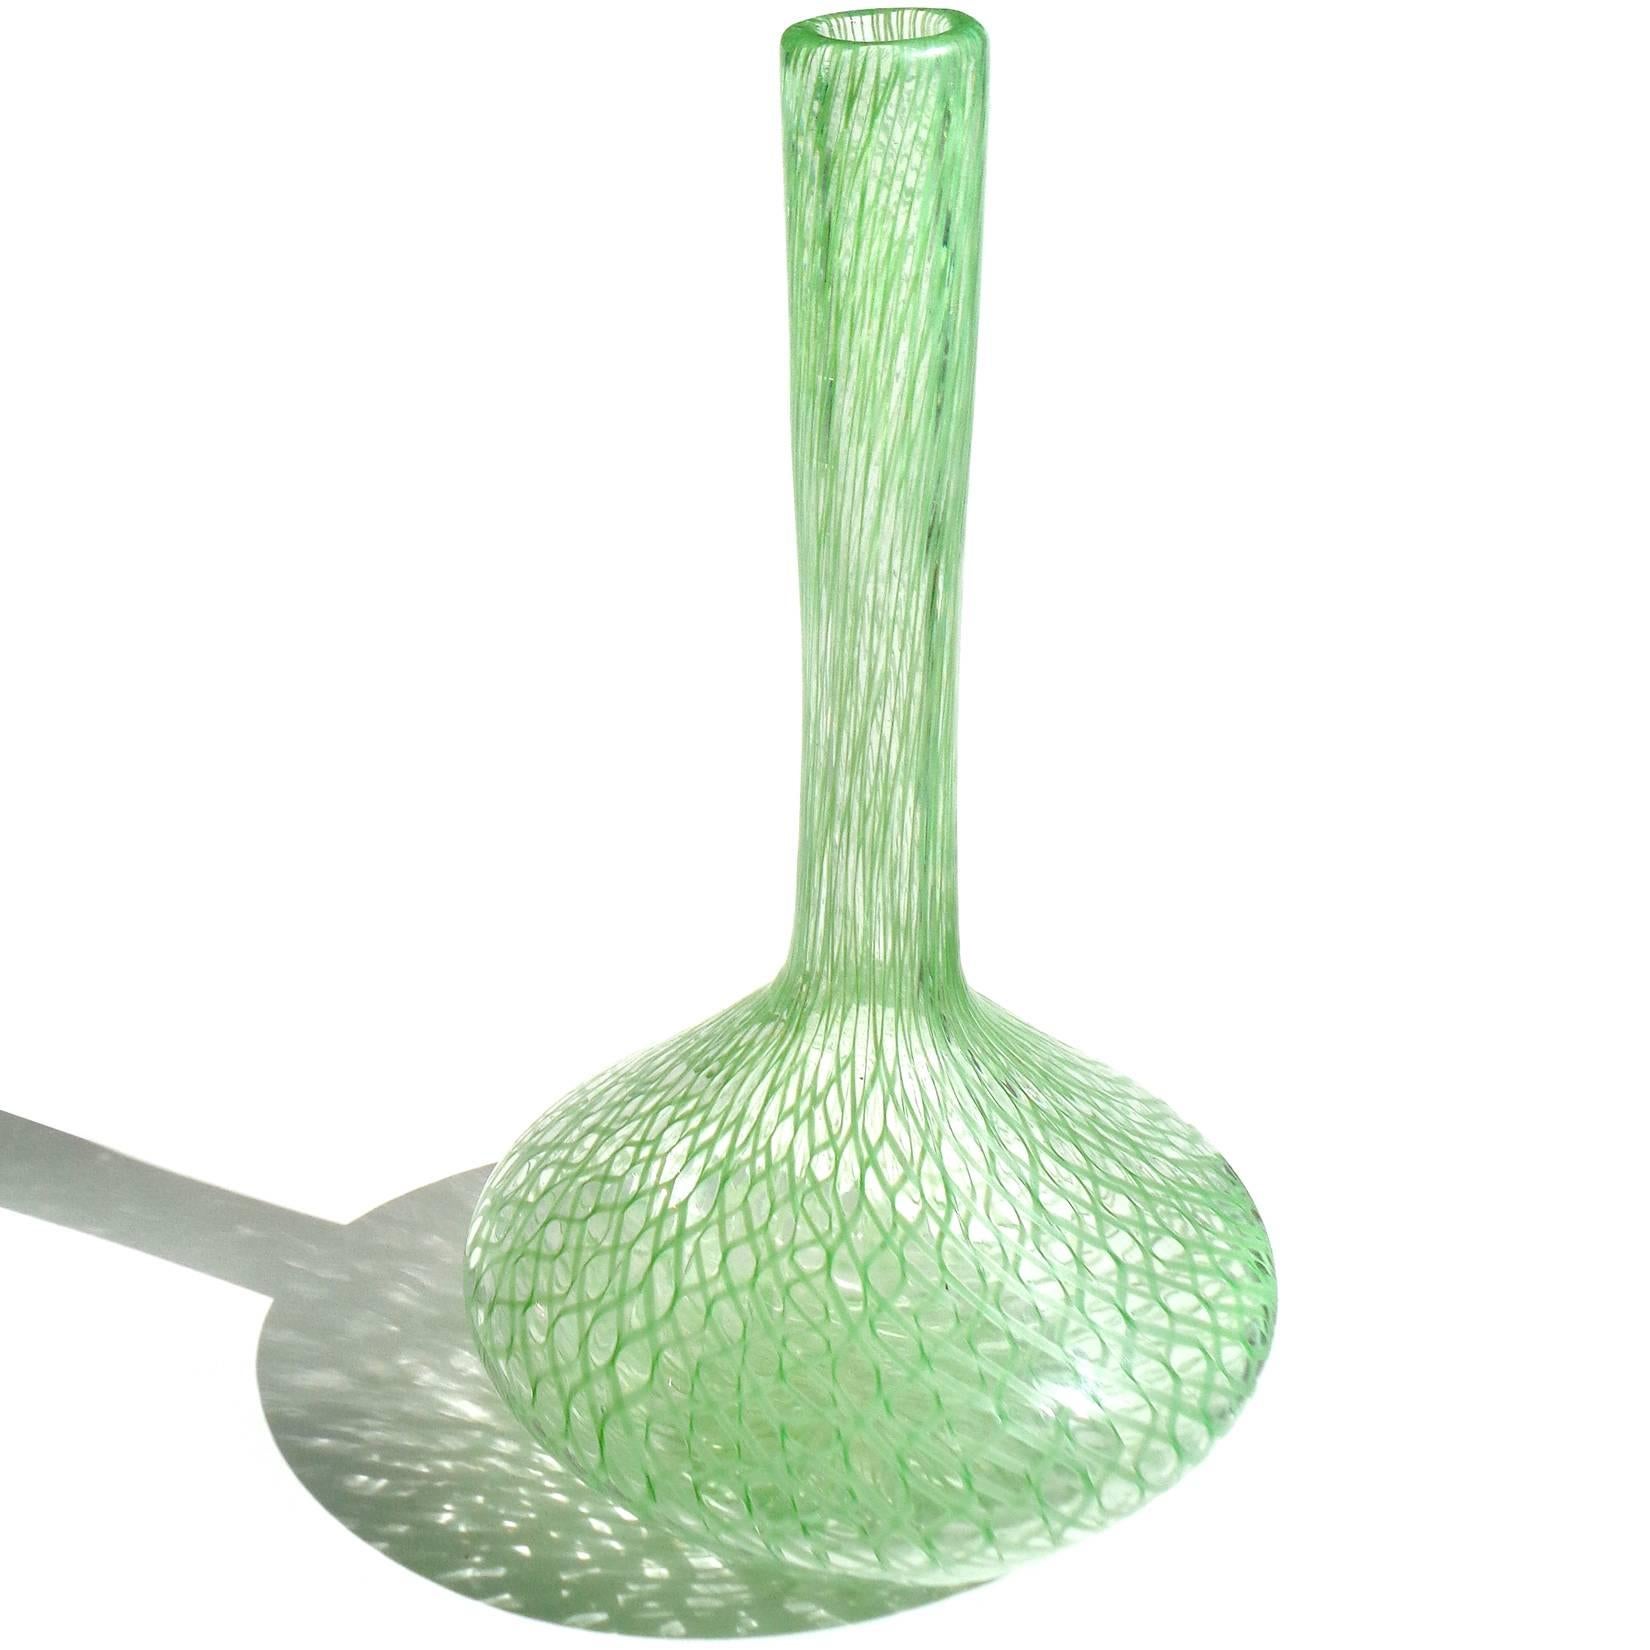 Free shipping worldwide! See details below description.

Rare large Murano handblown green Zanfirico ribbons art glass flower vase. Documented to designer Dino Martens, for Aureliano Toso, circa 1958. 

Please look at my exclusive 1stdibs